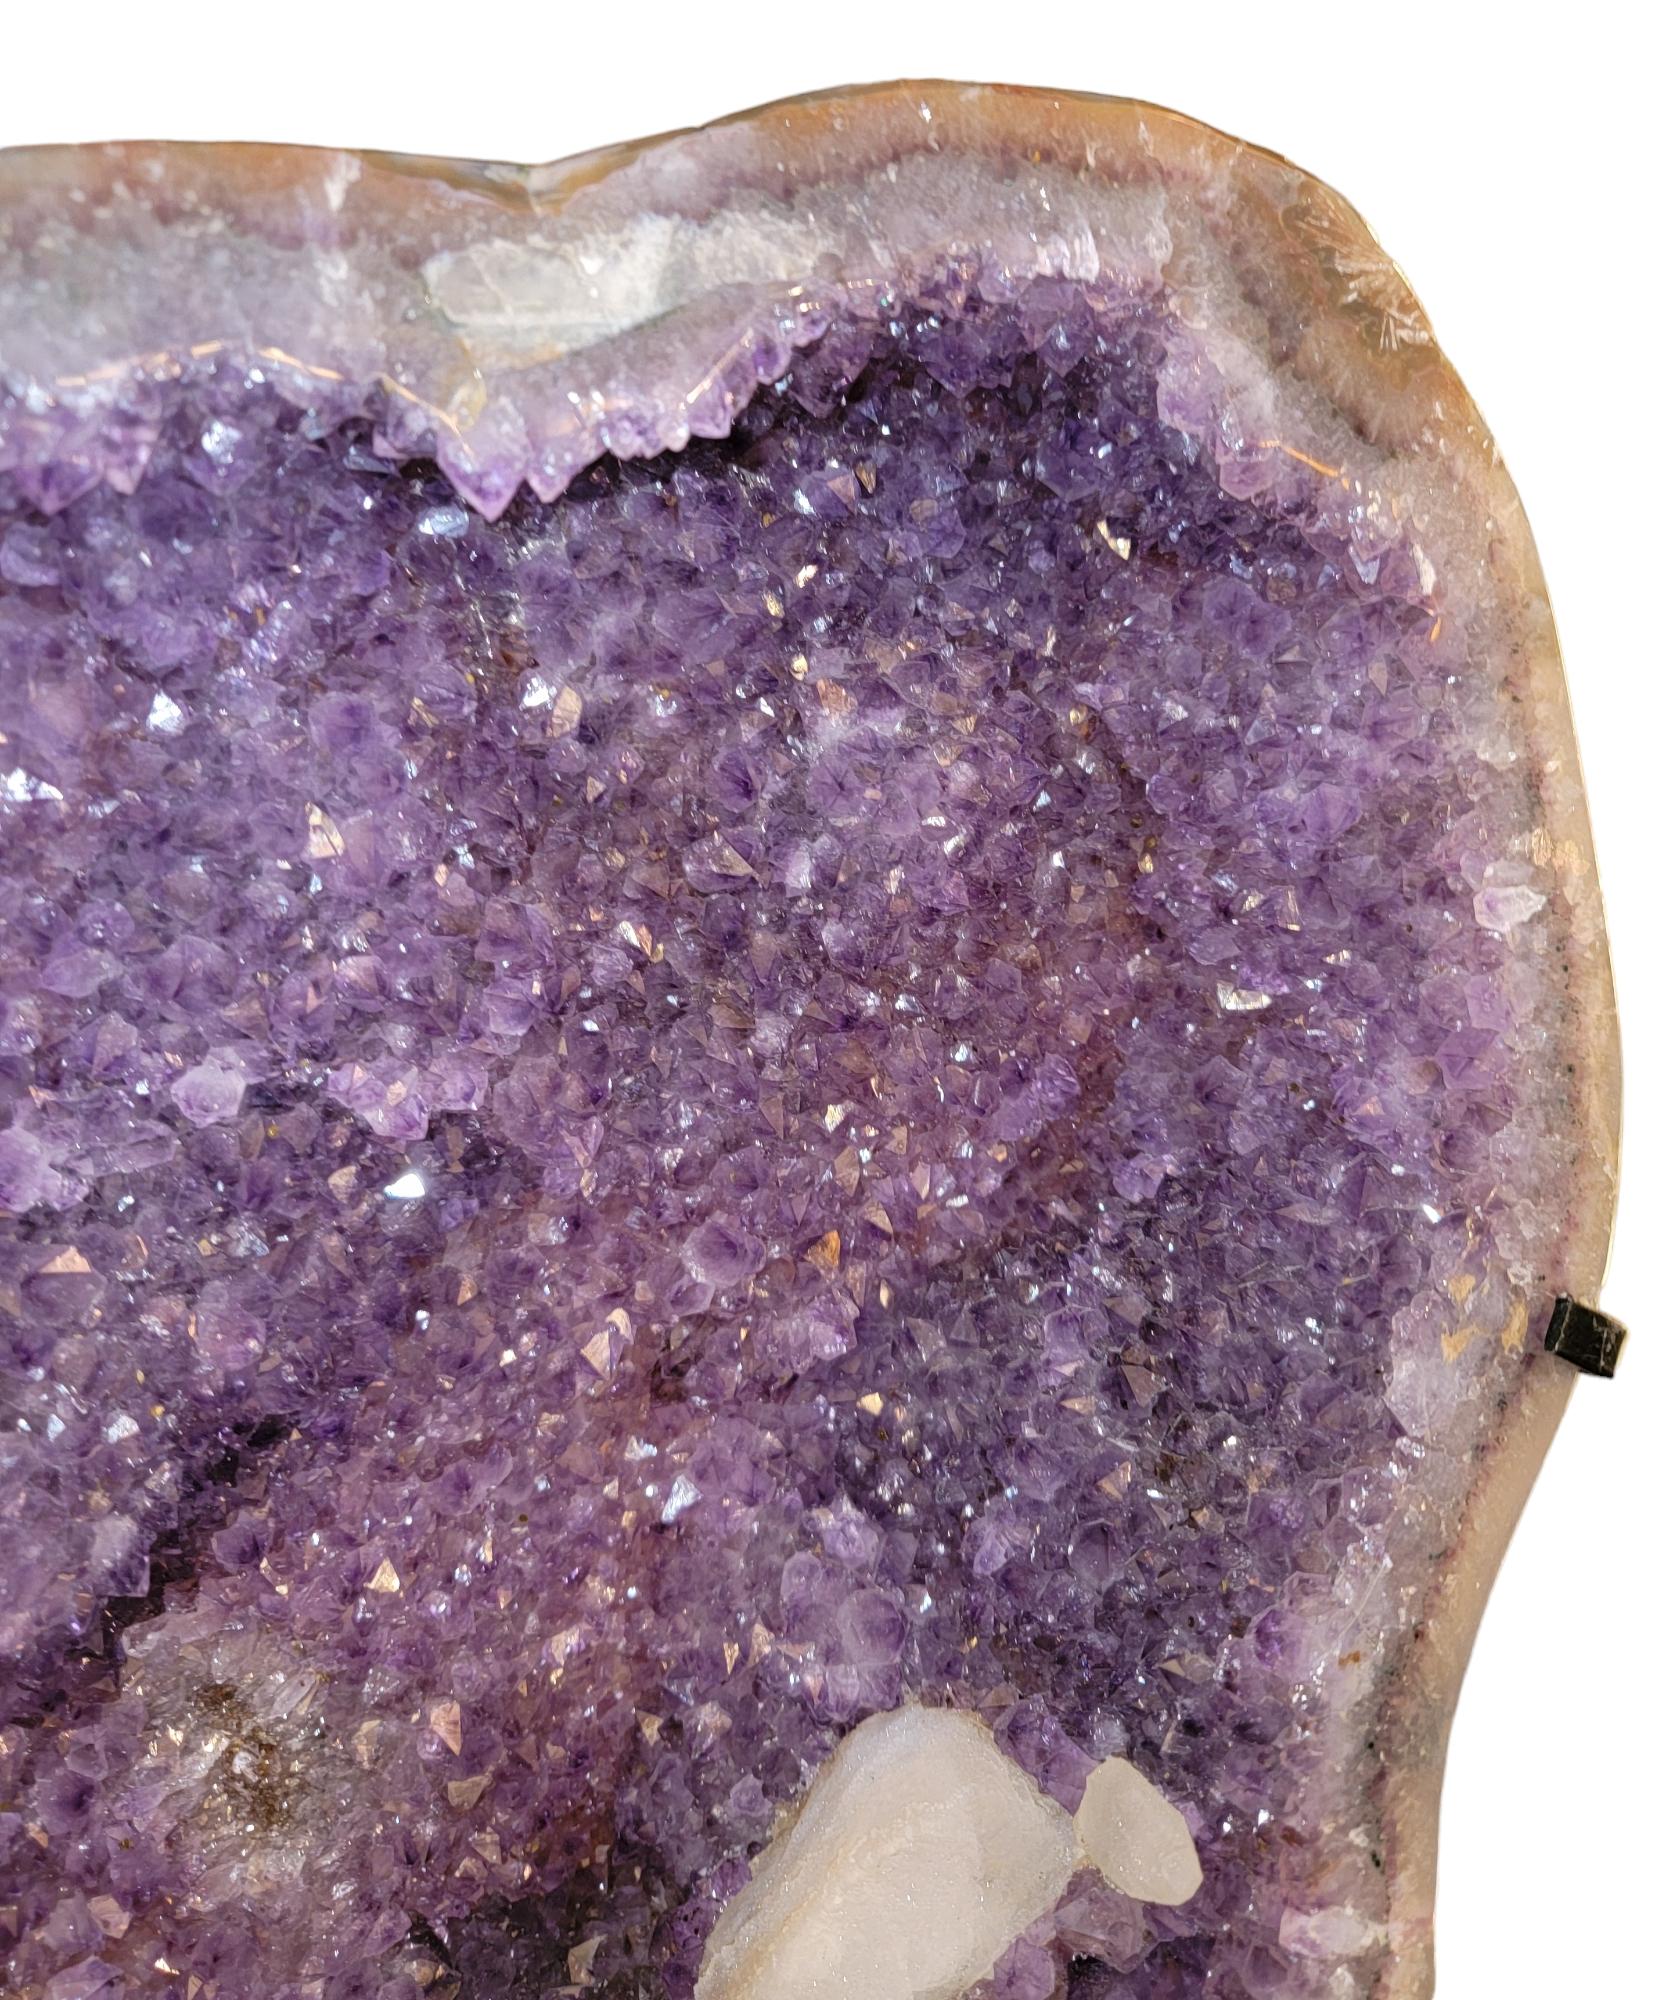 Rotating Agate Geode With Amethyst Crystals. The base of this natural specimen is made in a way hat allows the geode to turn in a 360 degree angle. It can be turned to face any direction while the base stays in place. The amethyst color is a